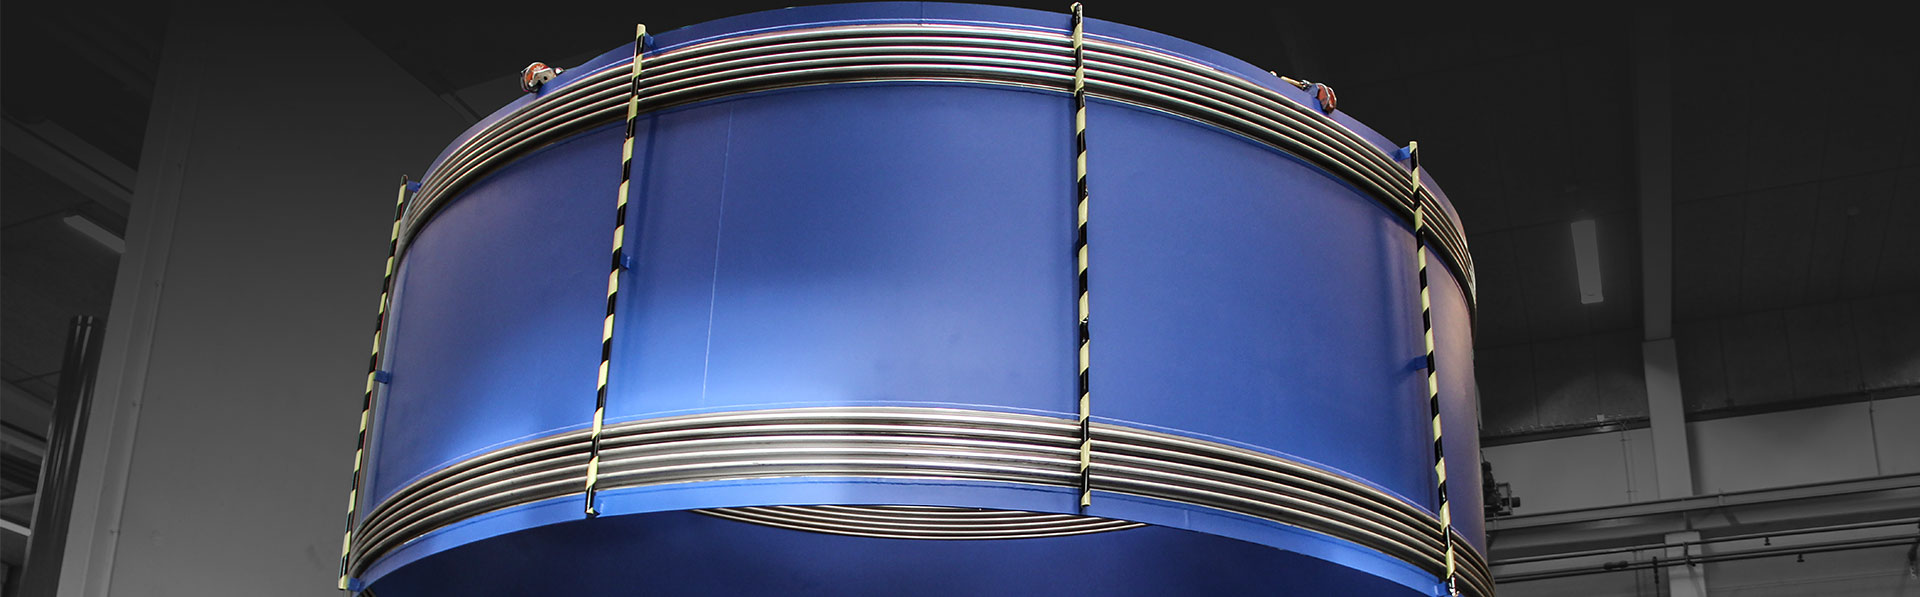 Belman excels in large sized expansion joints